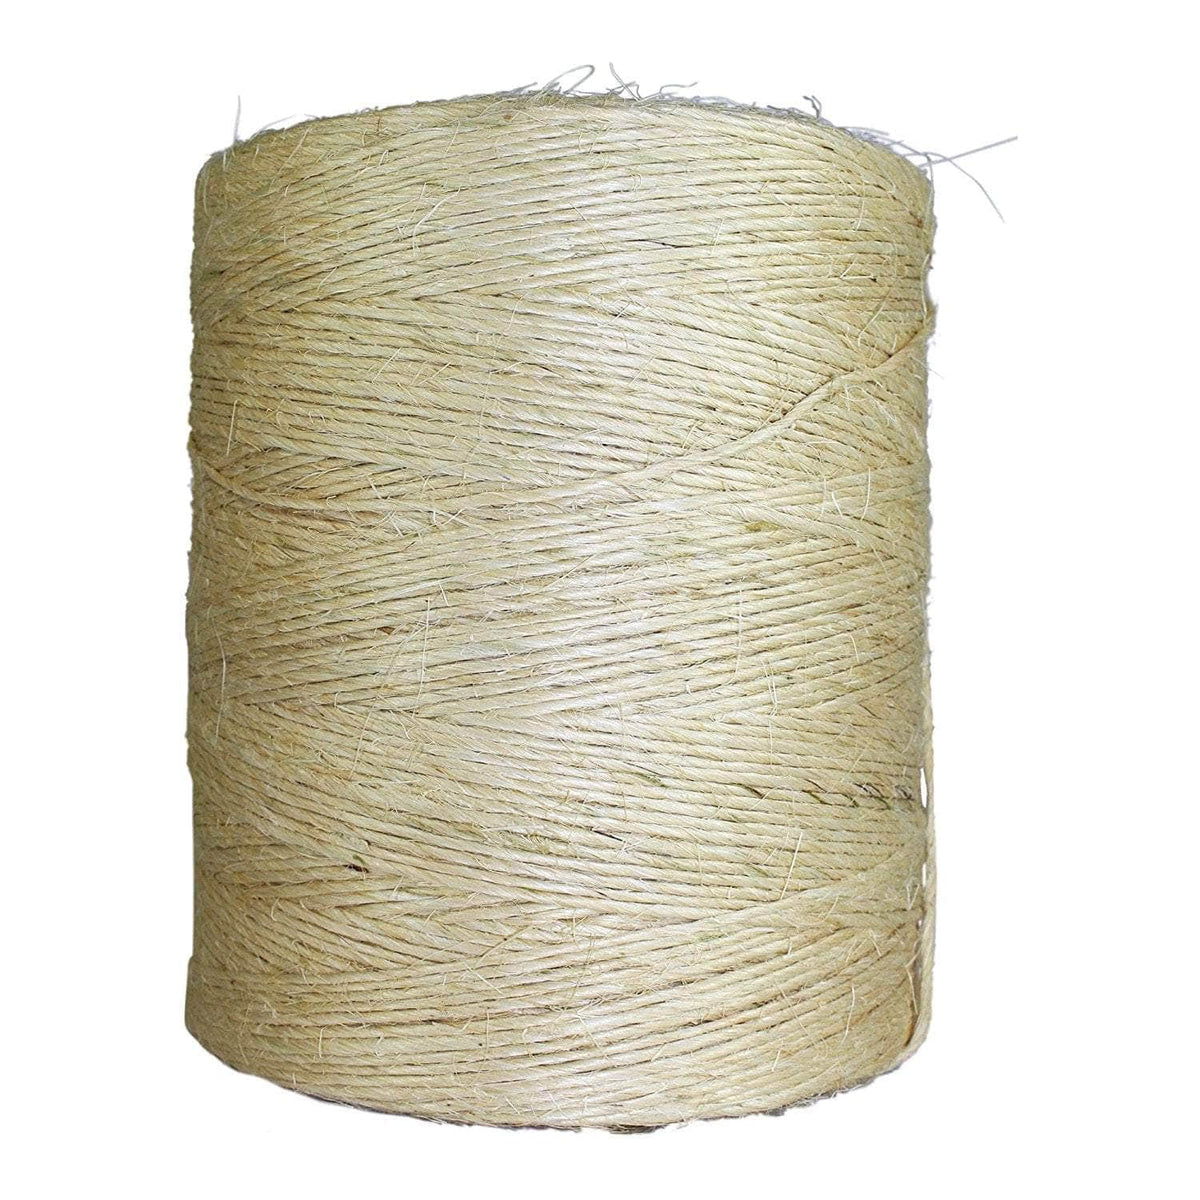 Hemp Twine String For Crafts Colorful Twine String Solid Yarn Colorful Rope  For Arts Crafts Mason